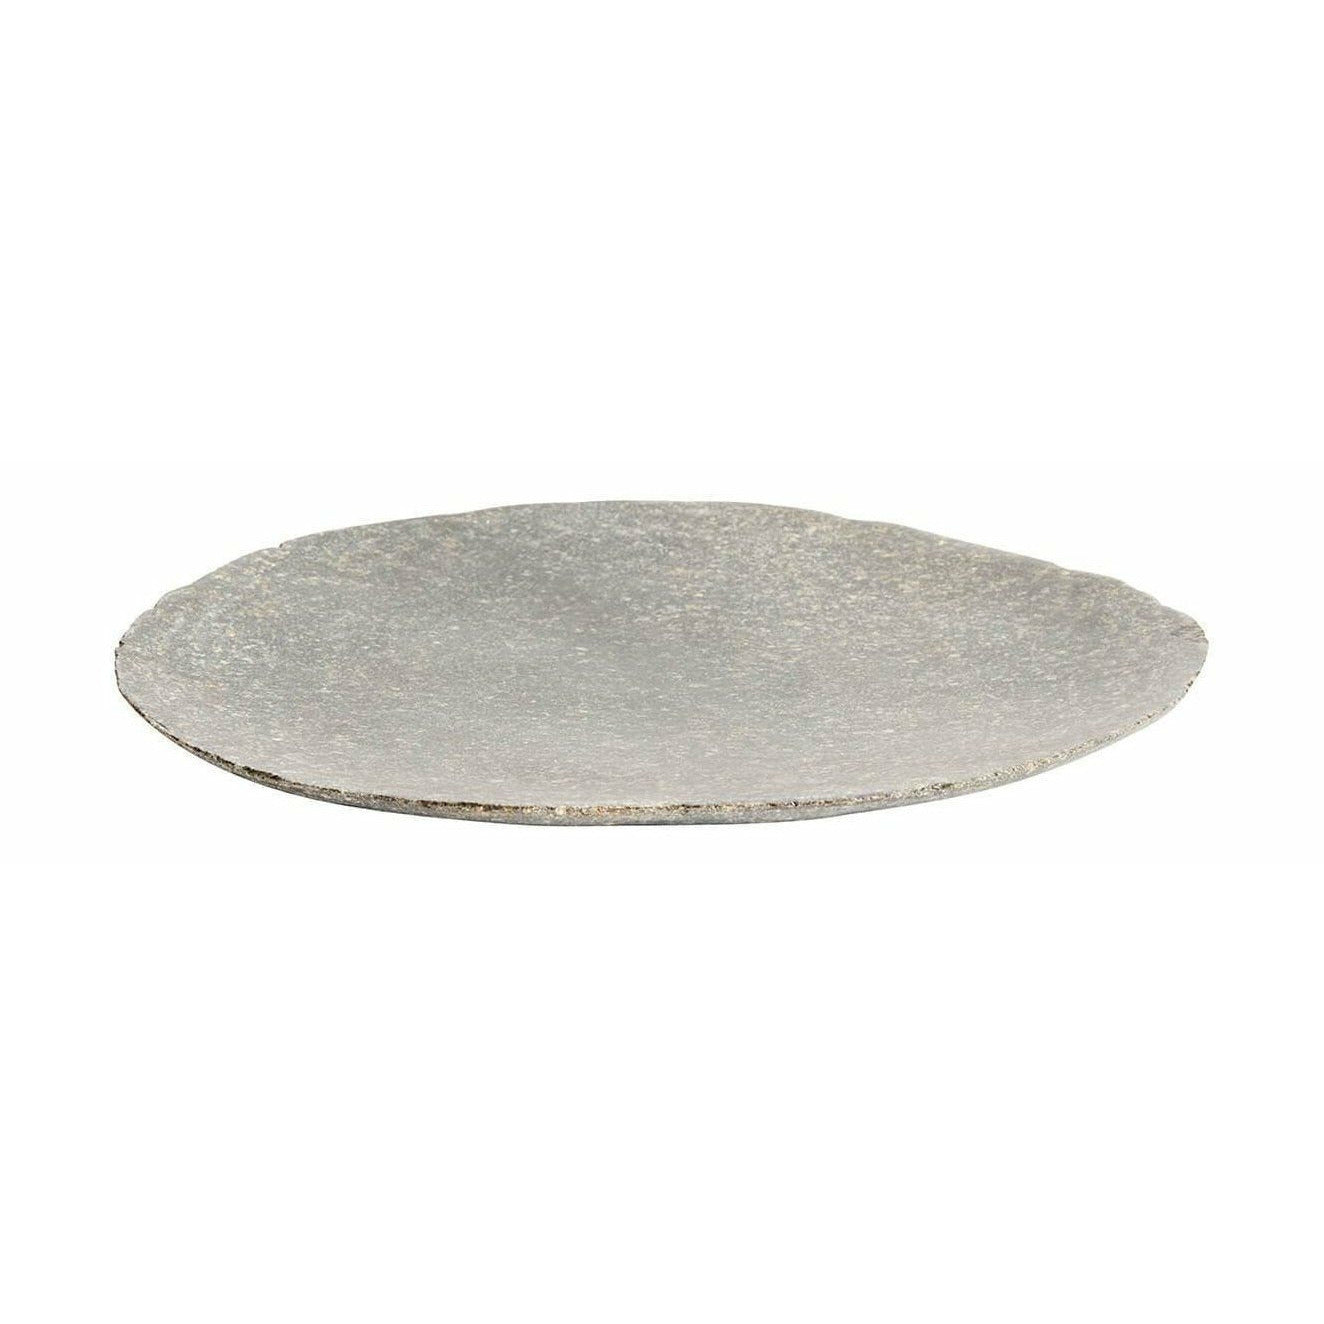 Muubs Valley Plate Riverstone, 28 cm